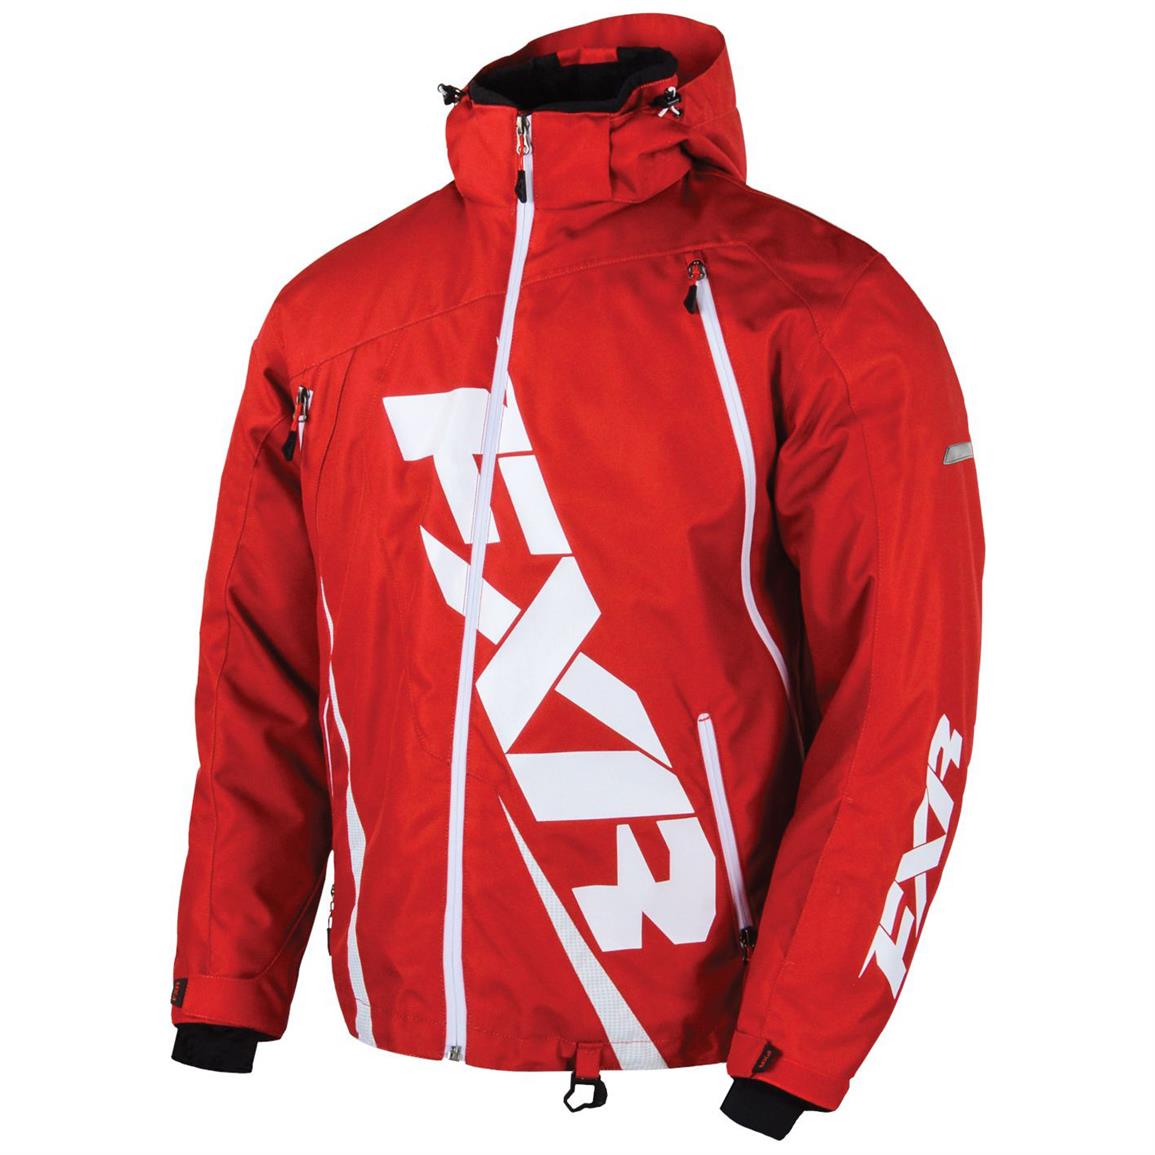 FXR Boost Jacket - 627768, Snowmobile Clothing at Sportsman's Guide